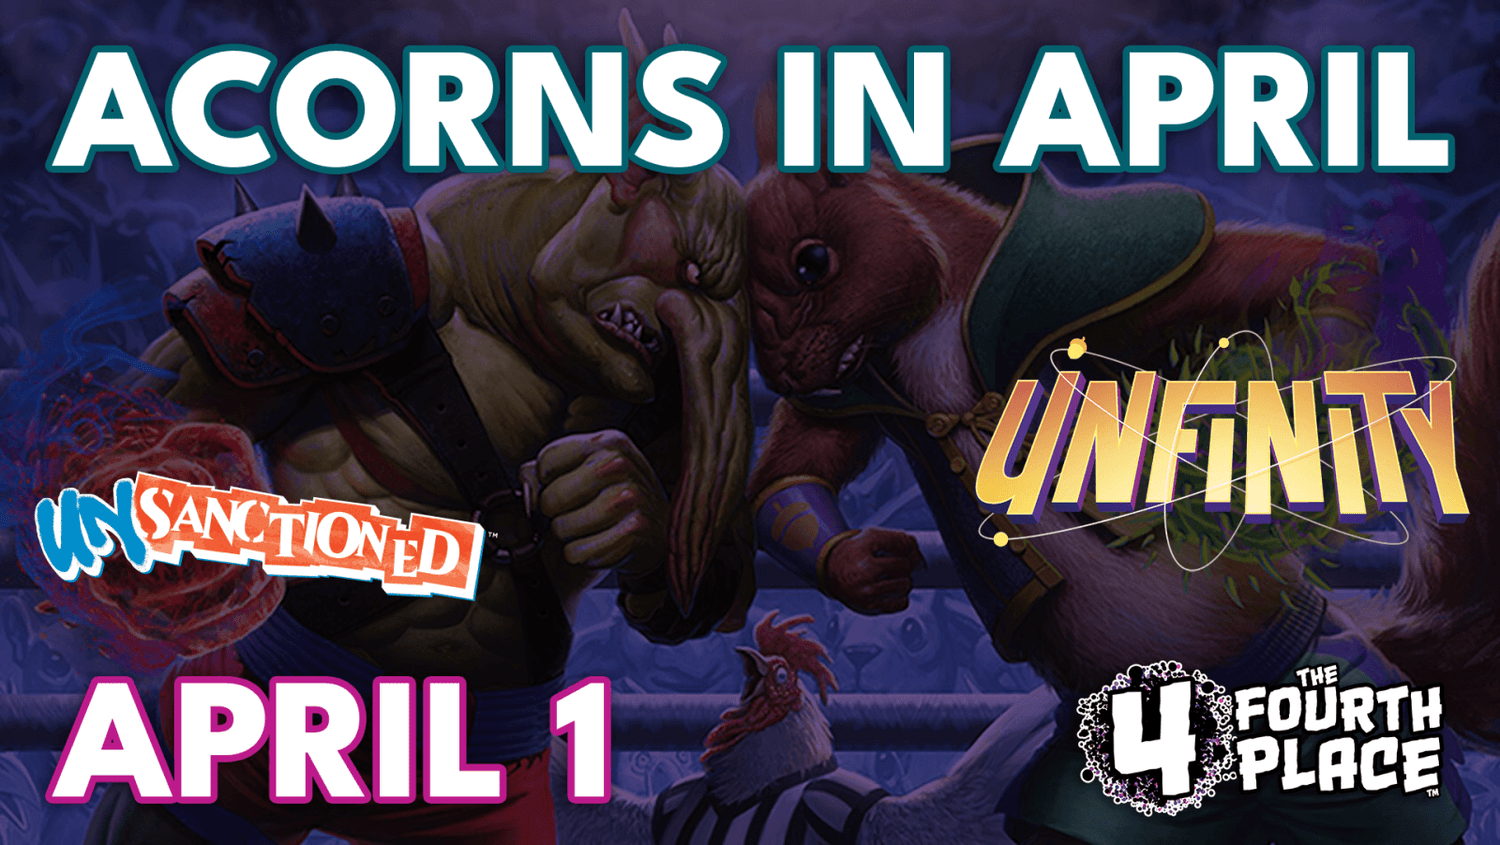 Acorns in April: Unsanctioned & Unfinity (Sealed Tournament Bundle) - The Fourth Place